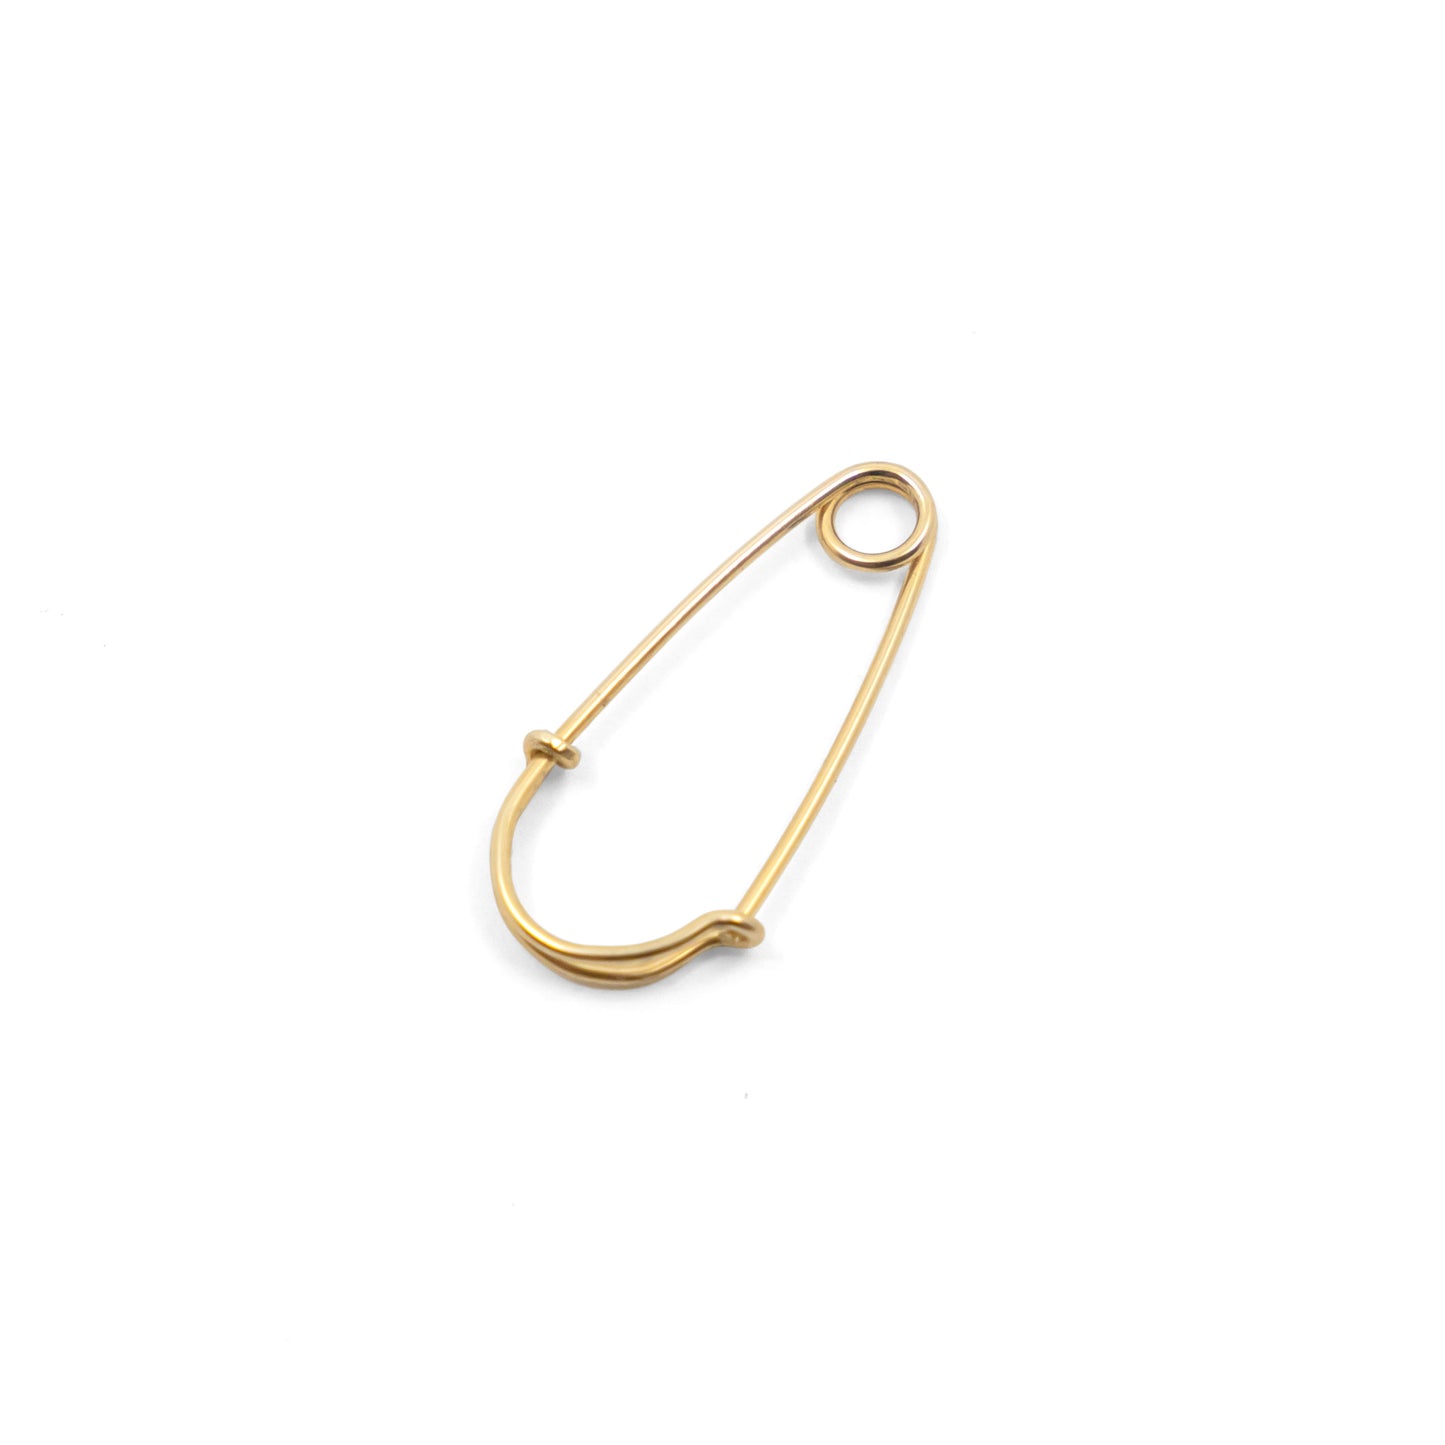 Wire Safety Pin Earring (Coiled) - 14k Yellow Gold - Futaba Hayashi